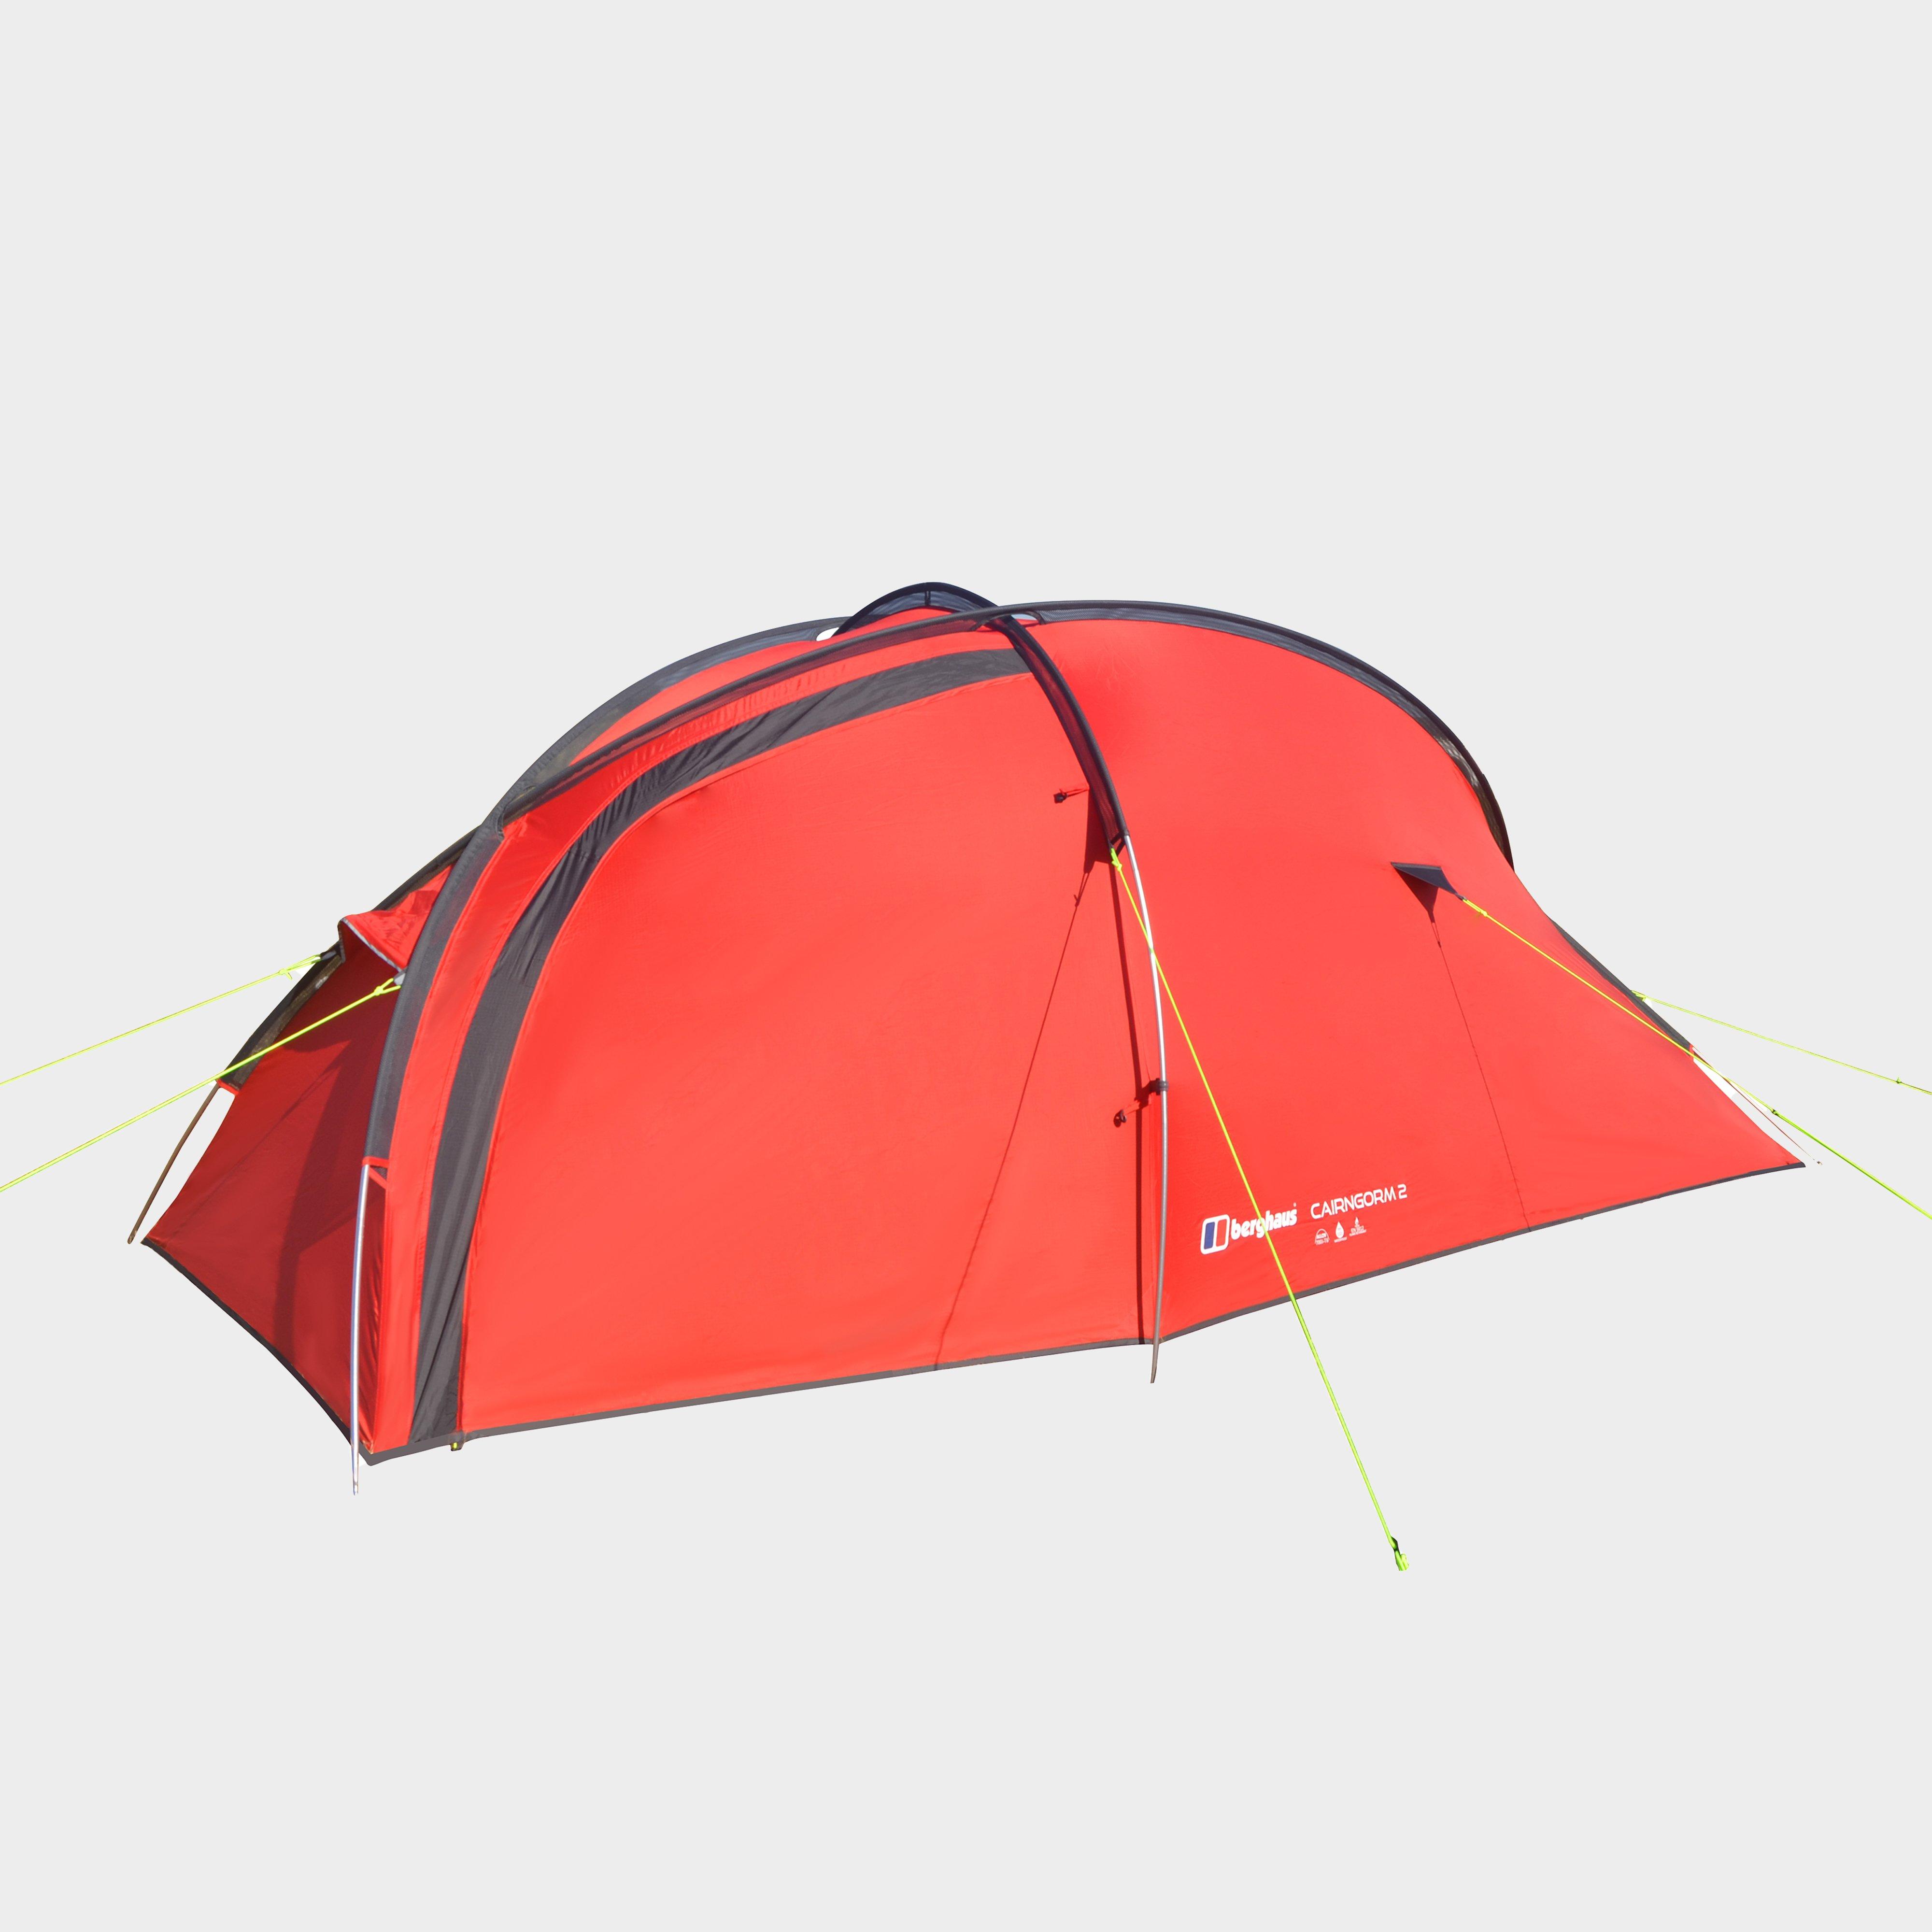 Berghaus Berghaus Cairngorm 2 Tent - Red/red  Red/red